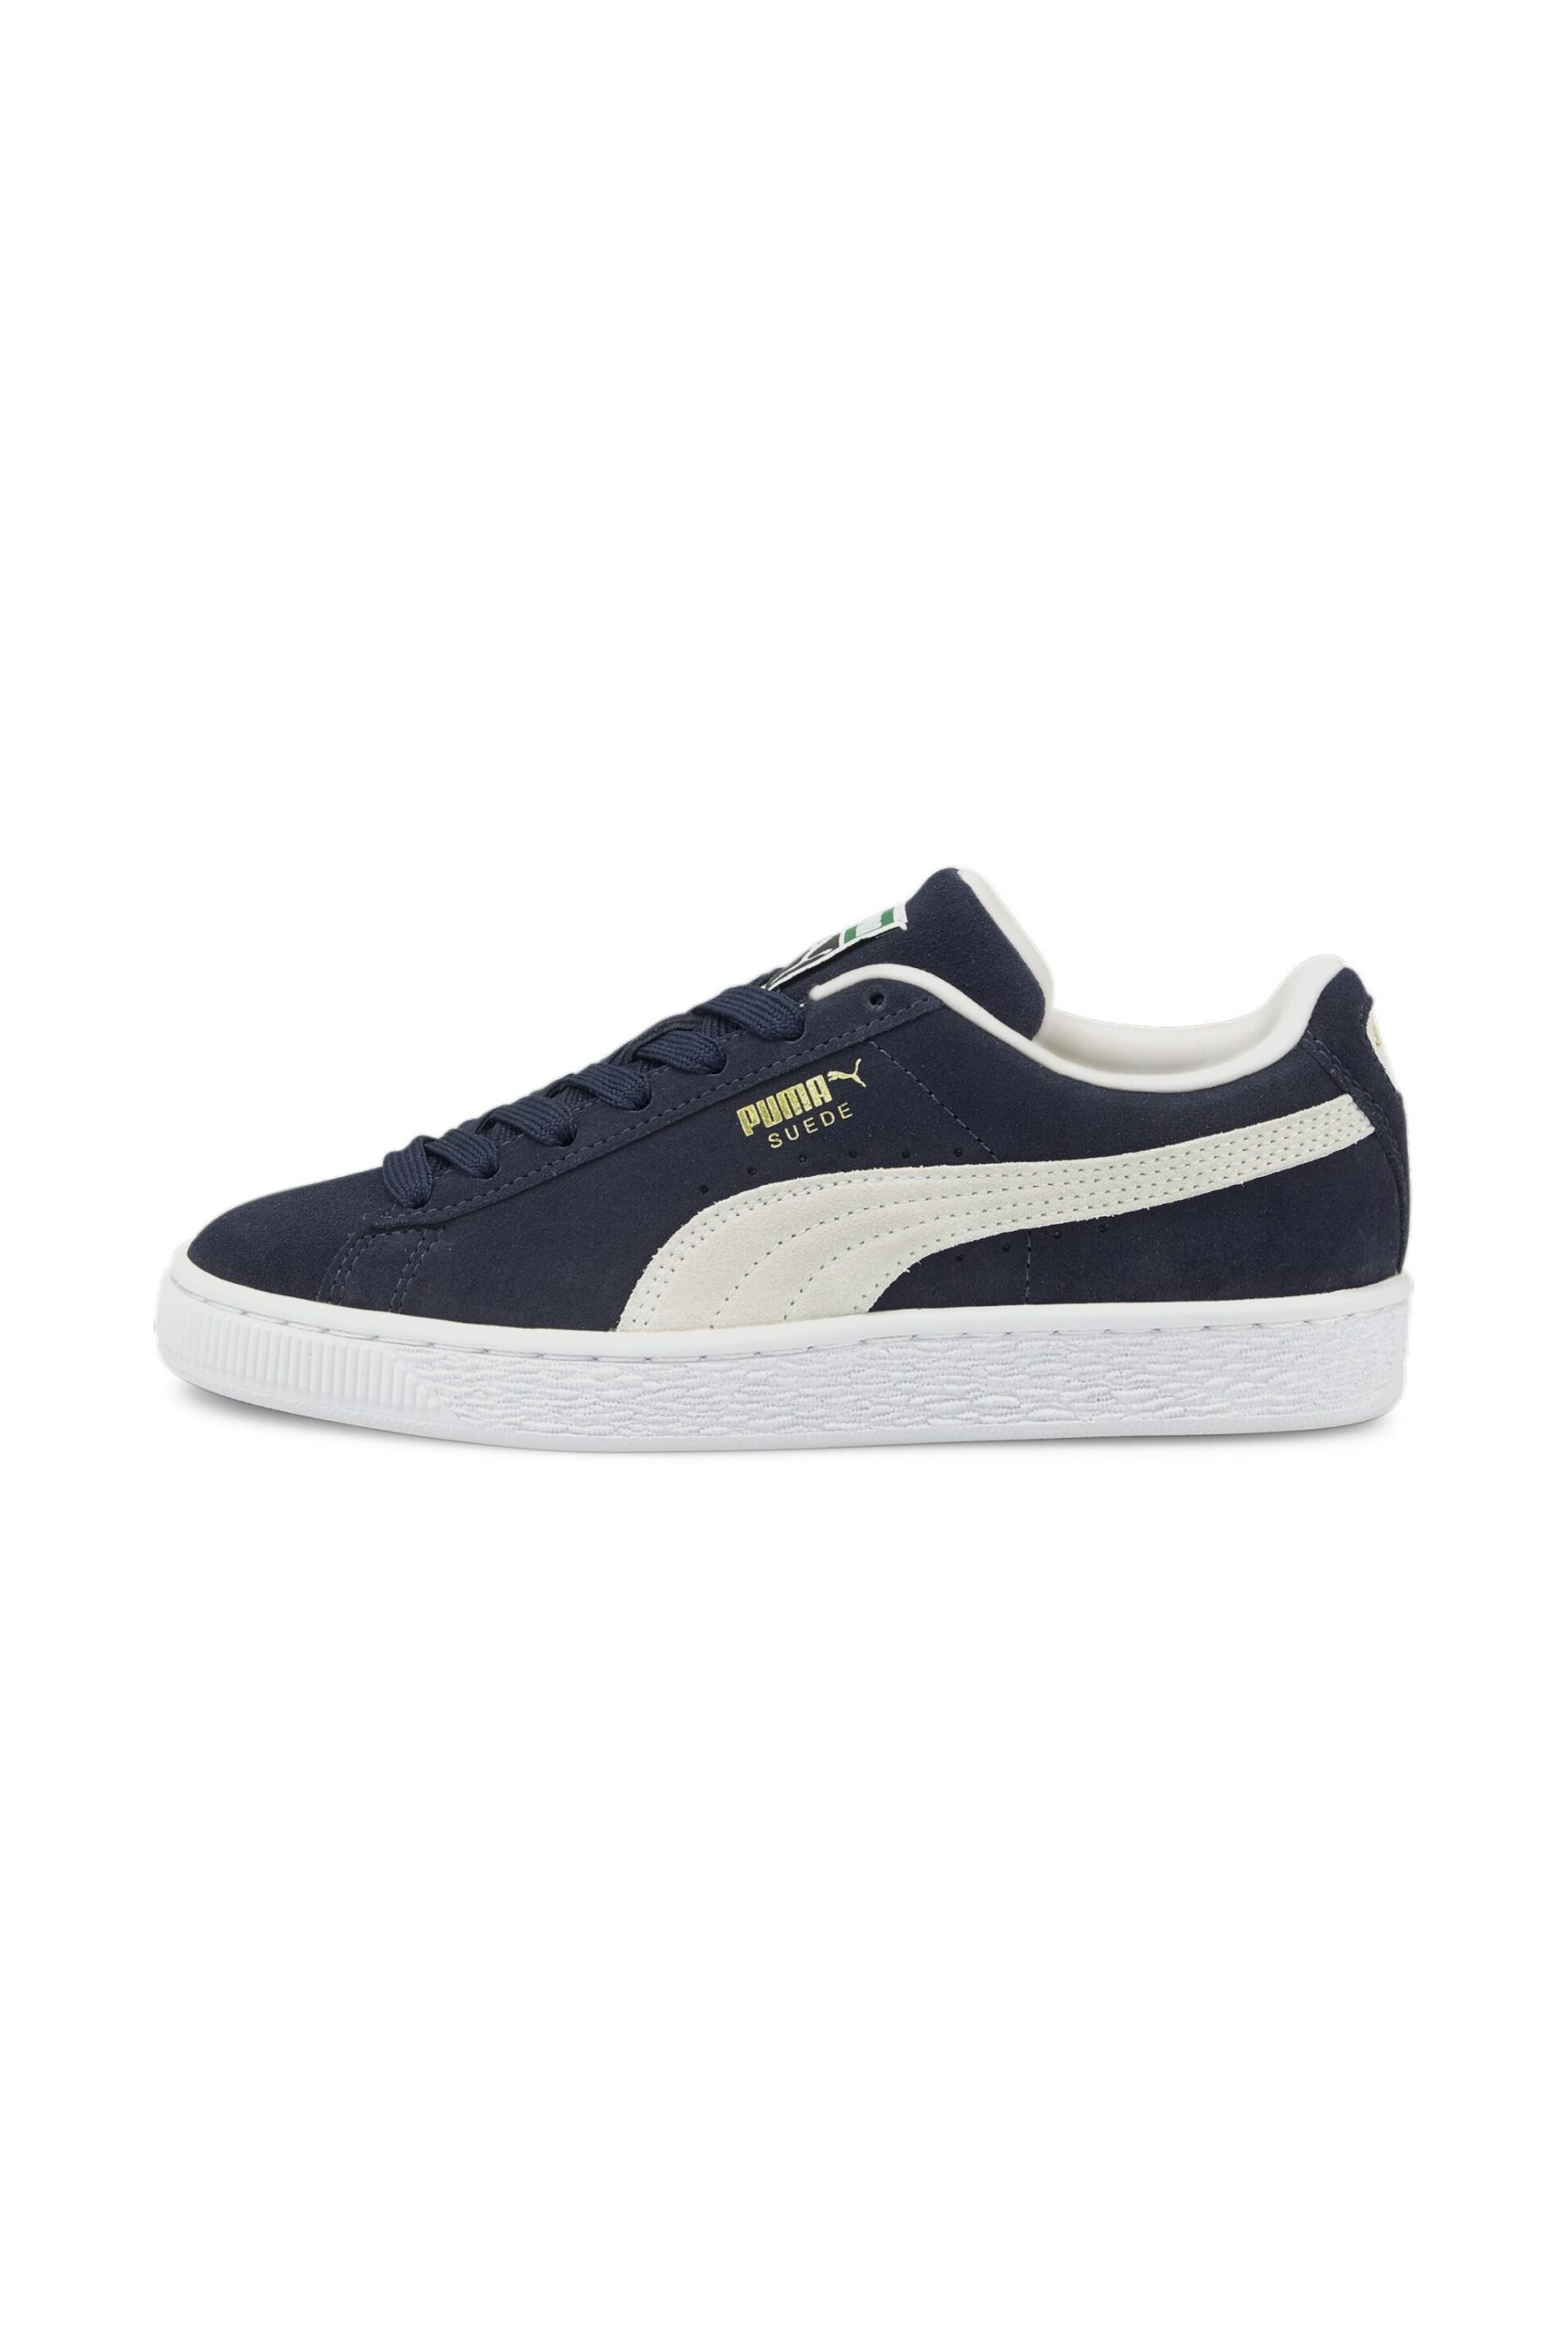 Puma Blue Suede Classic XXI Youth Trainers - Image 2 of 6